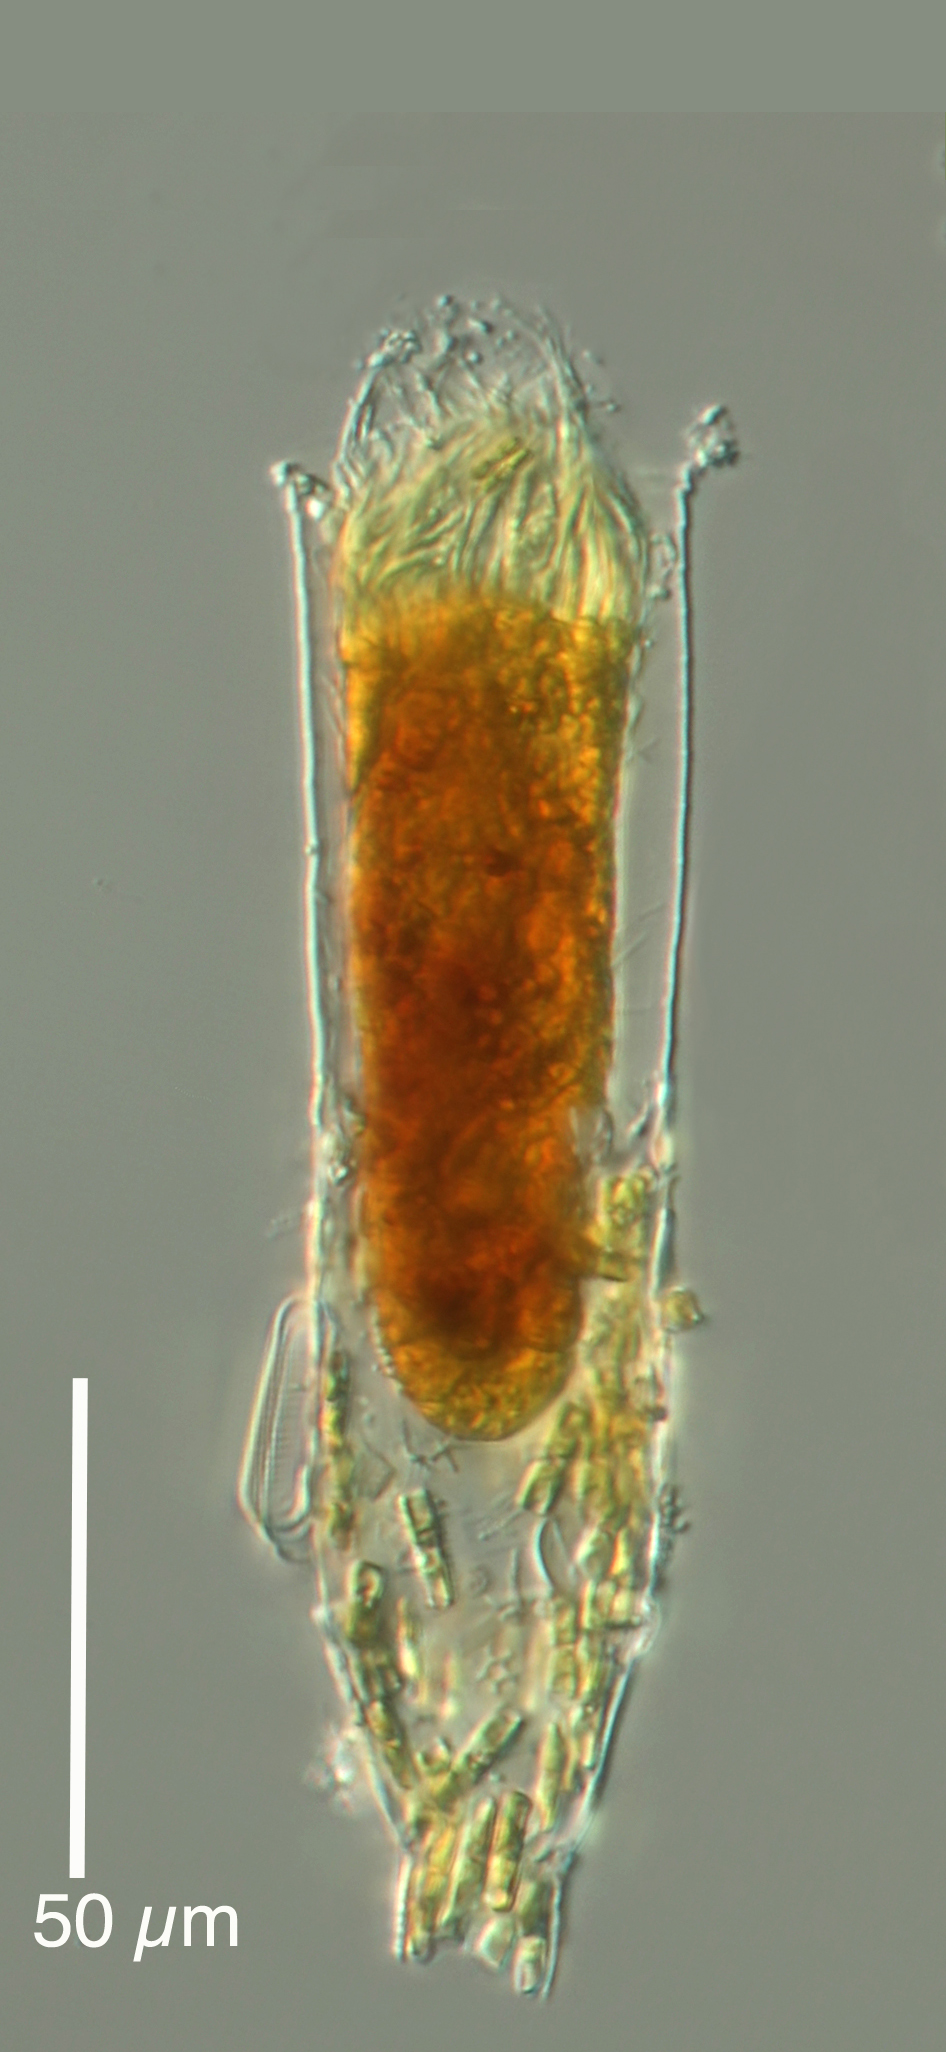 Laackmanniella naviculaefera from station 16